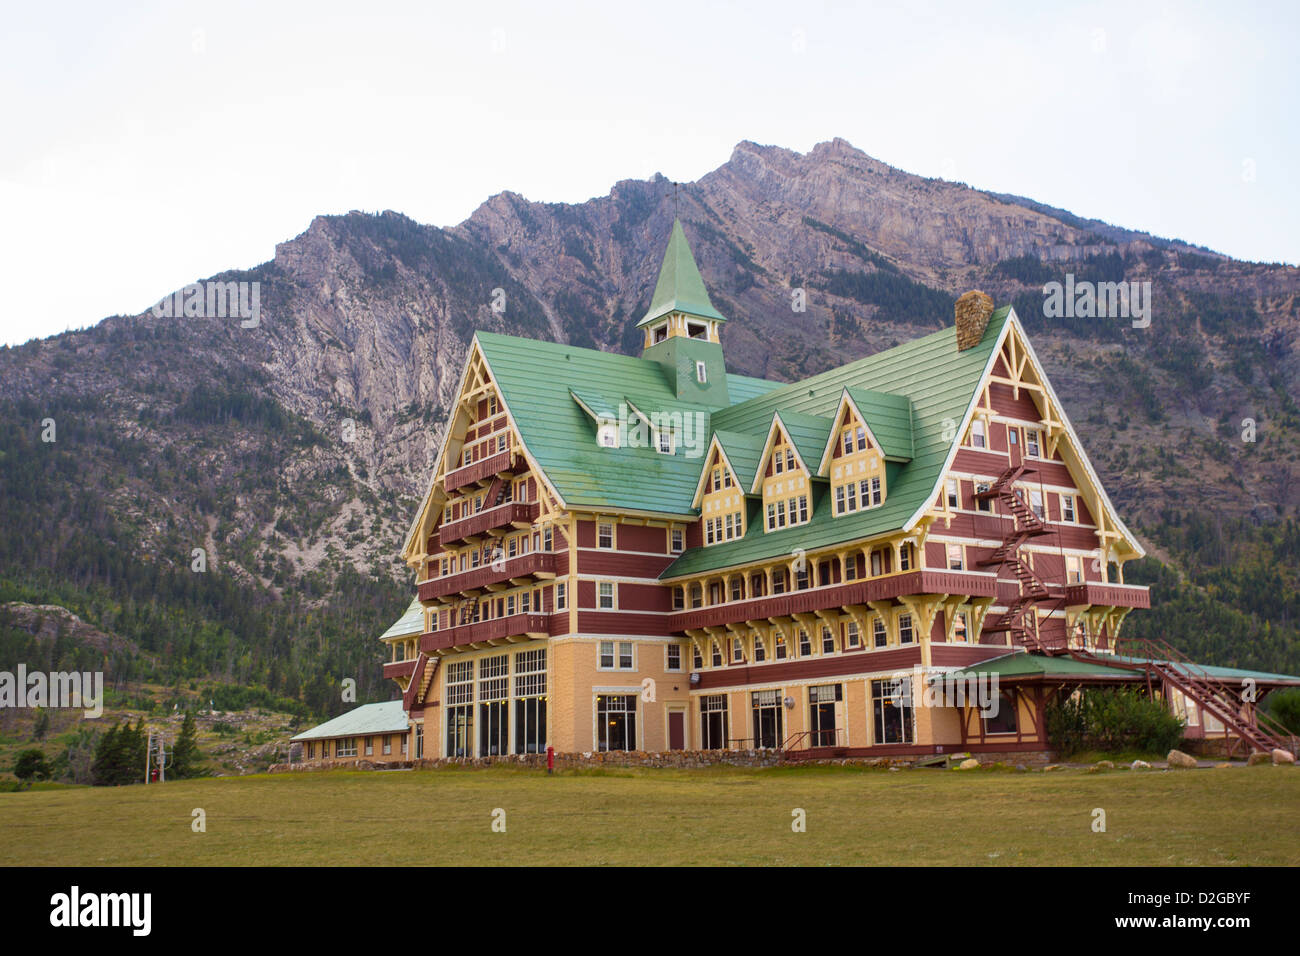 Exterior of Prince of Wales hotel in Waterton Lakes National Park in Alberta Canada Stock Photo